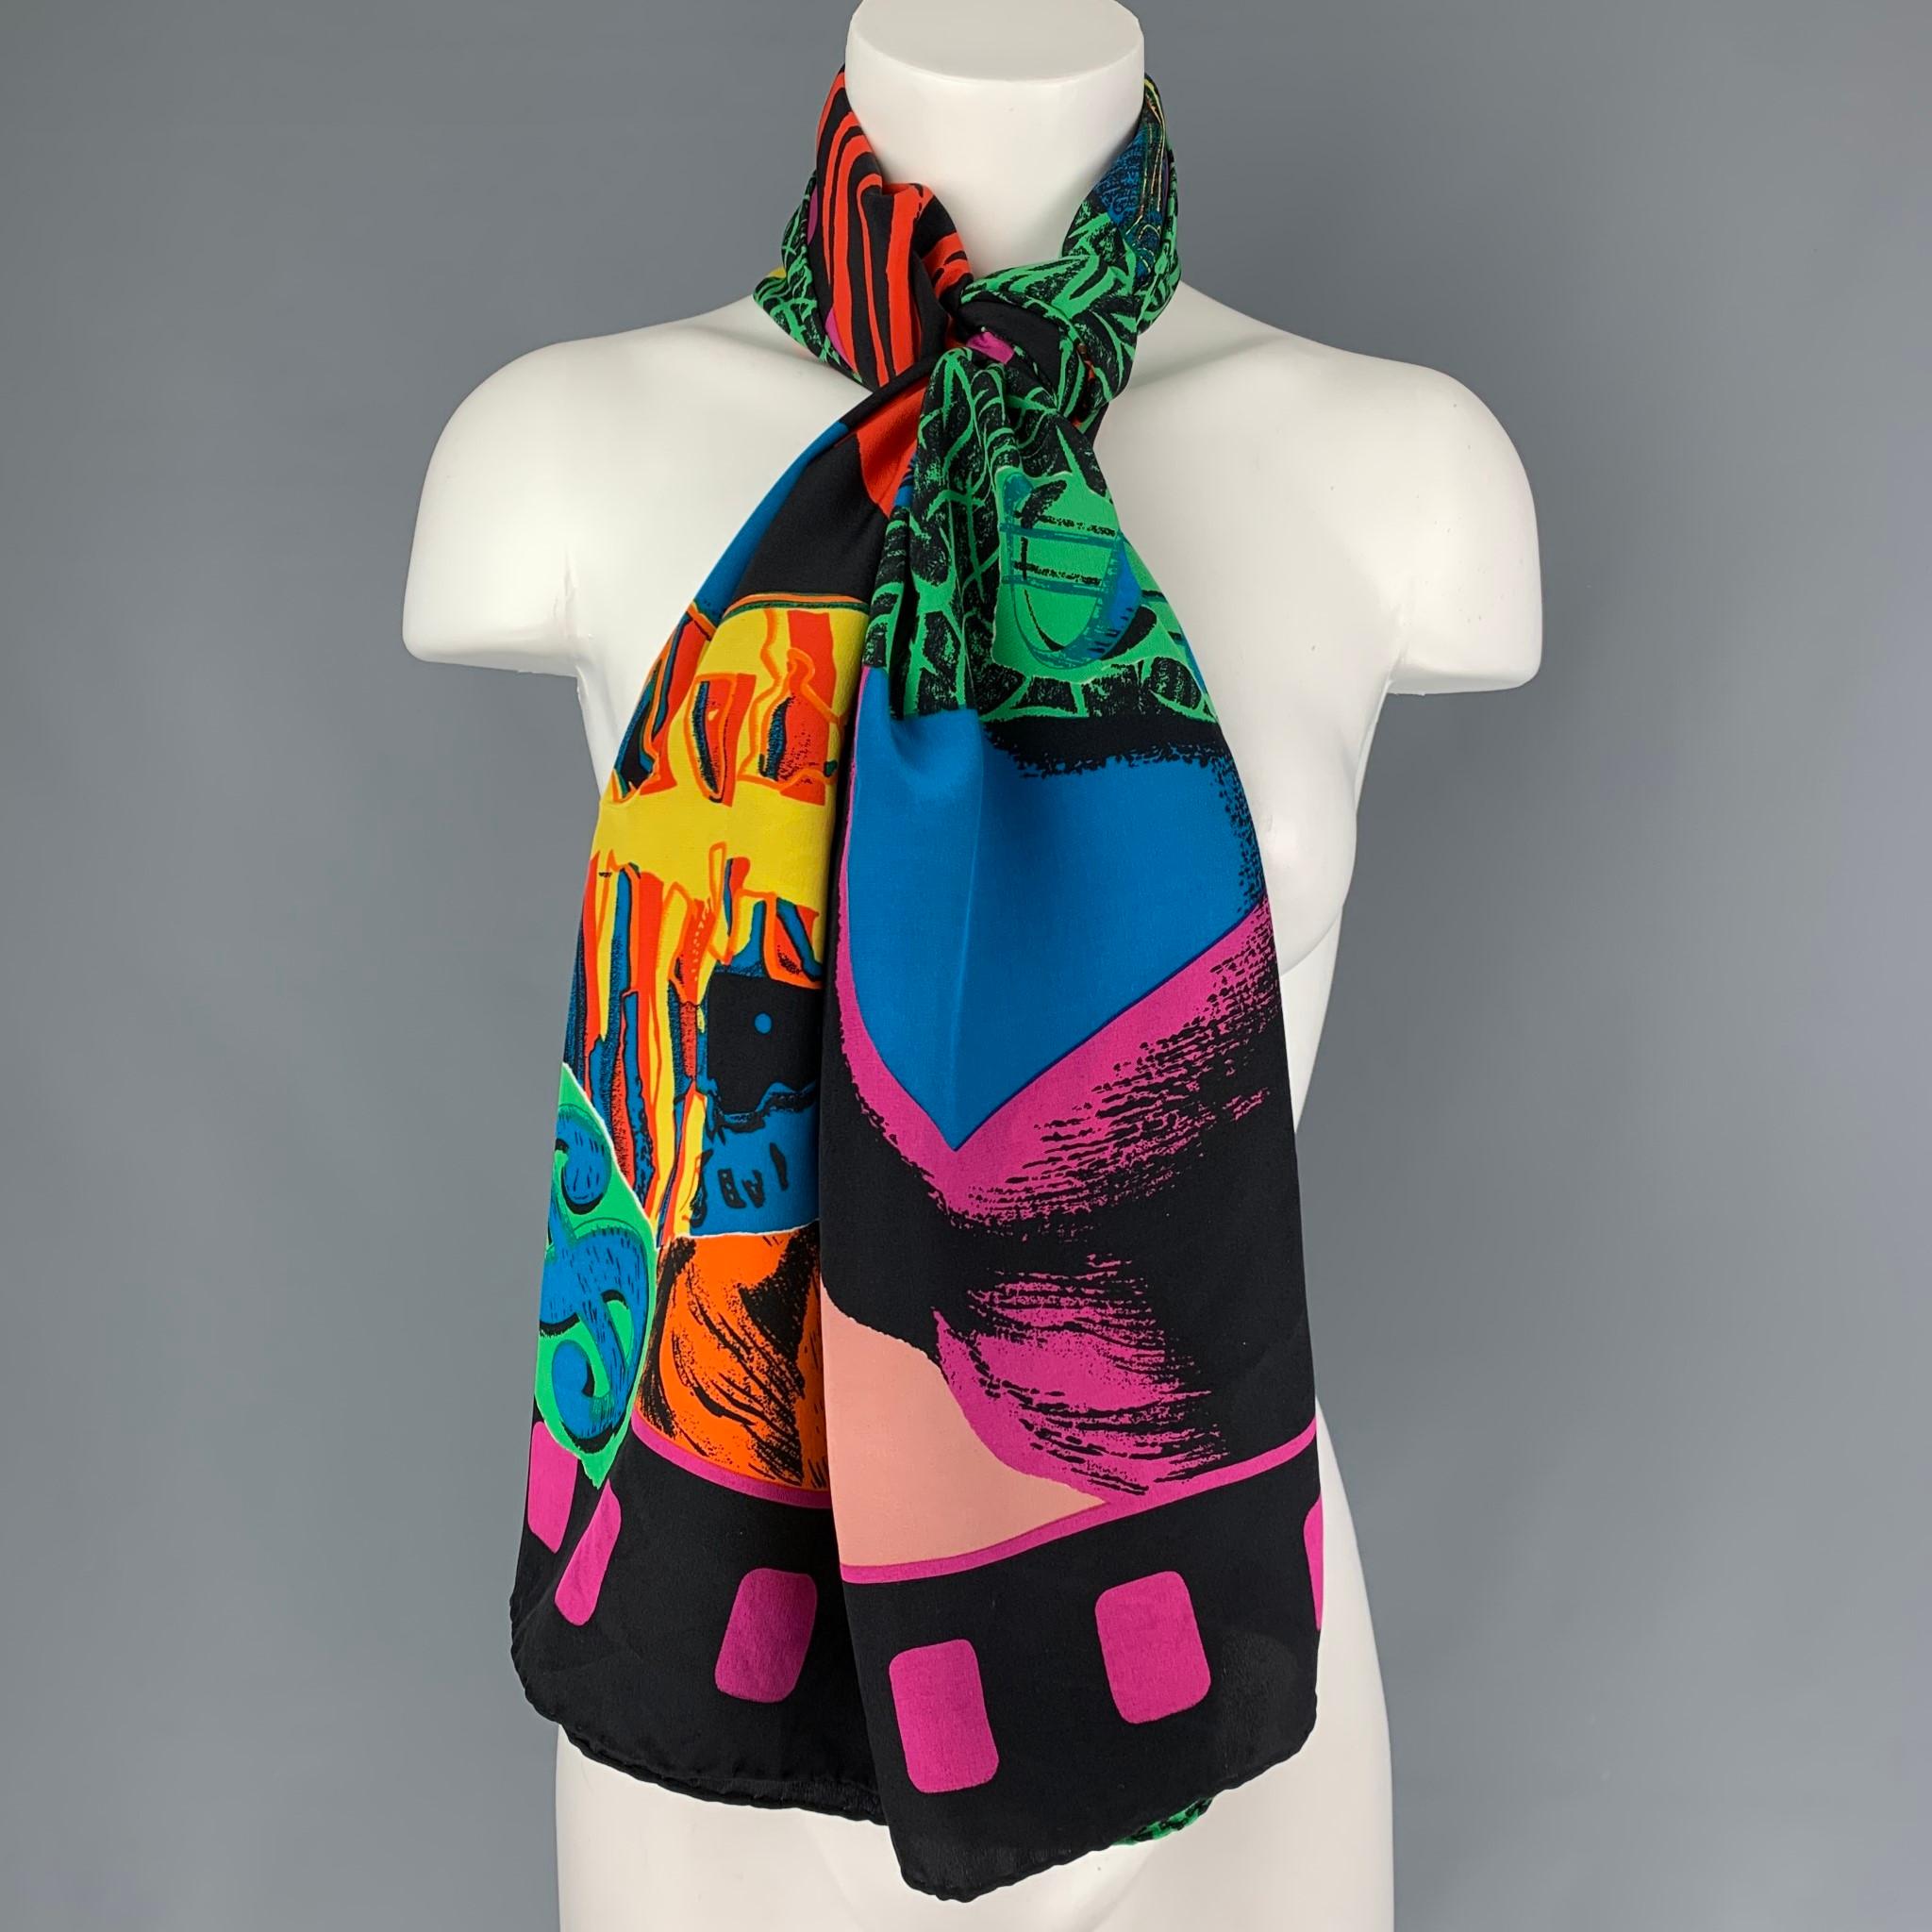 LOUIS FERAUD x ANDY WARHOL scarf comes in a multi-color abstract print material.

Very Good Pre-Owned Condition. Light marks. As-Is. Fabric tag removed.

Measurements:

48 in. x 42 in. 